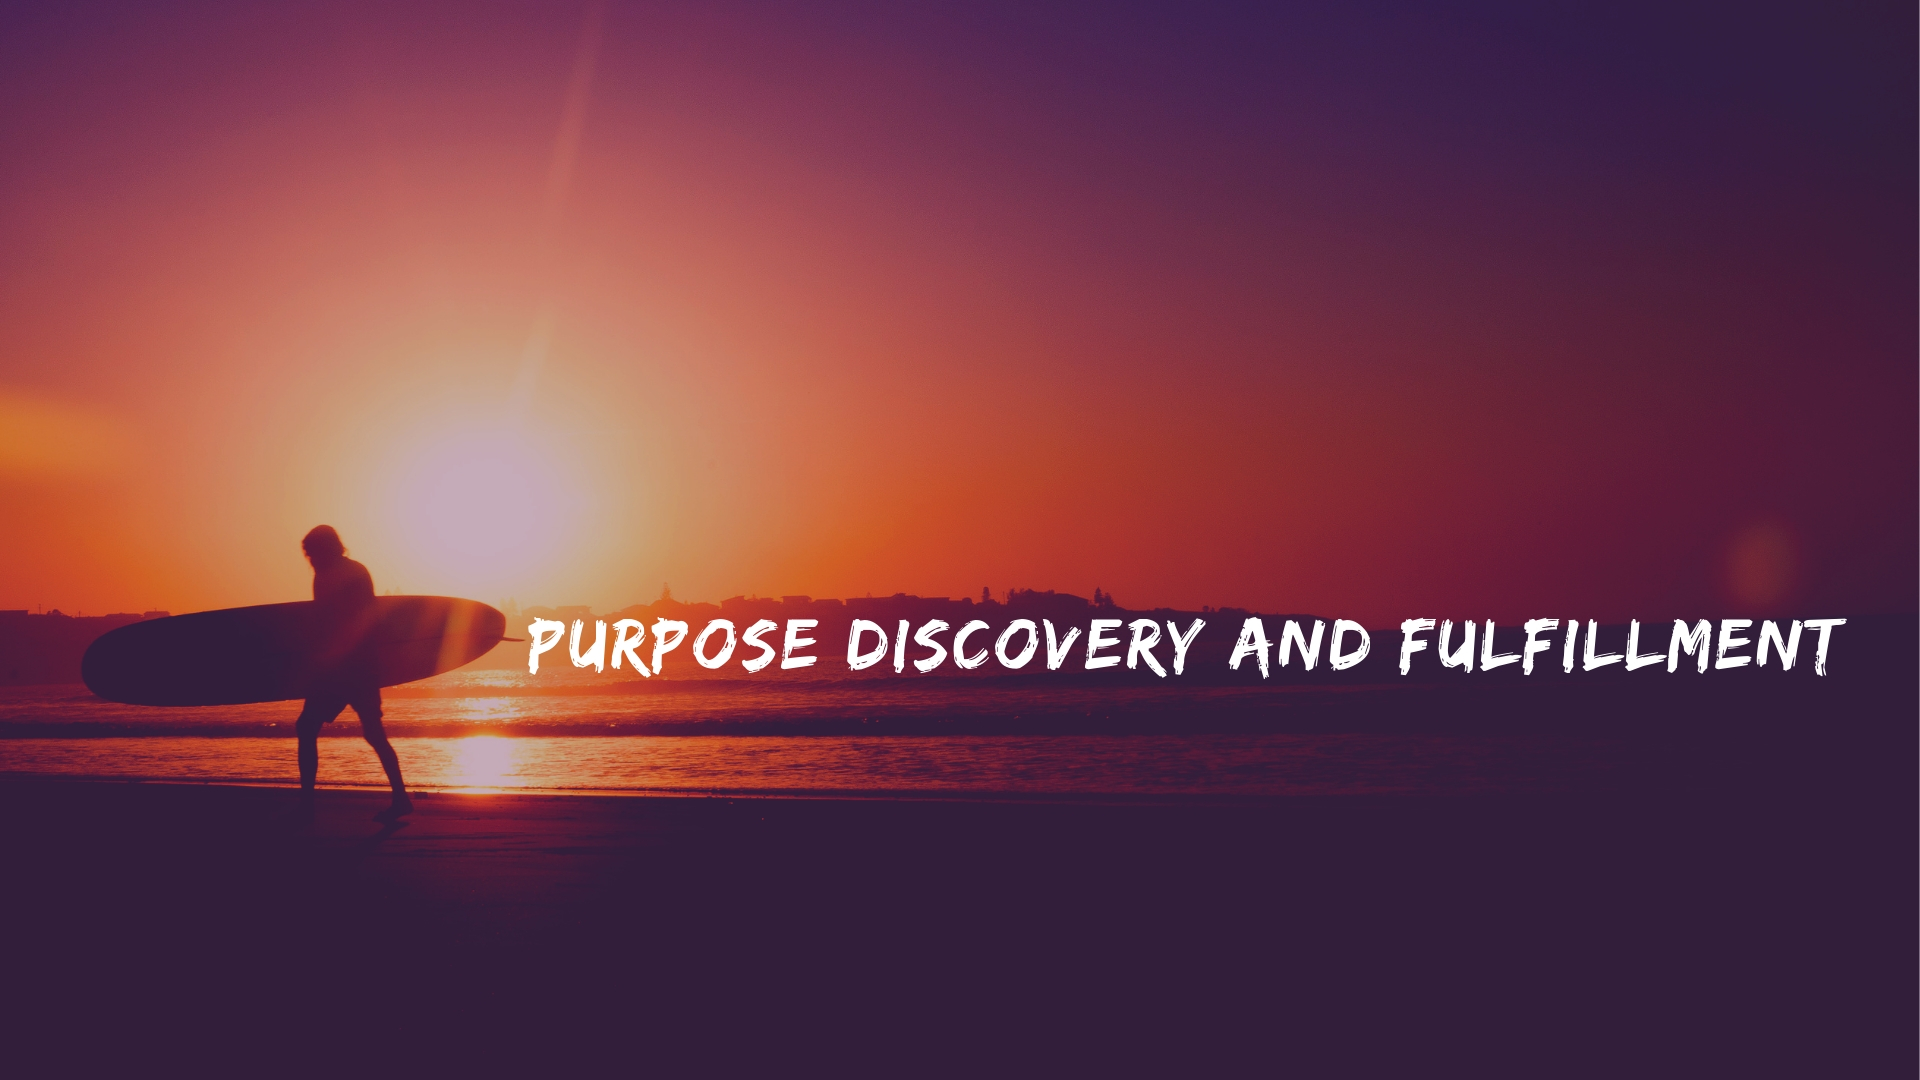 Purpose Discovery and Fulfillment